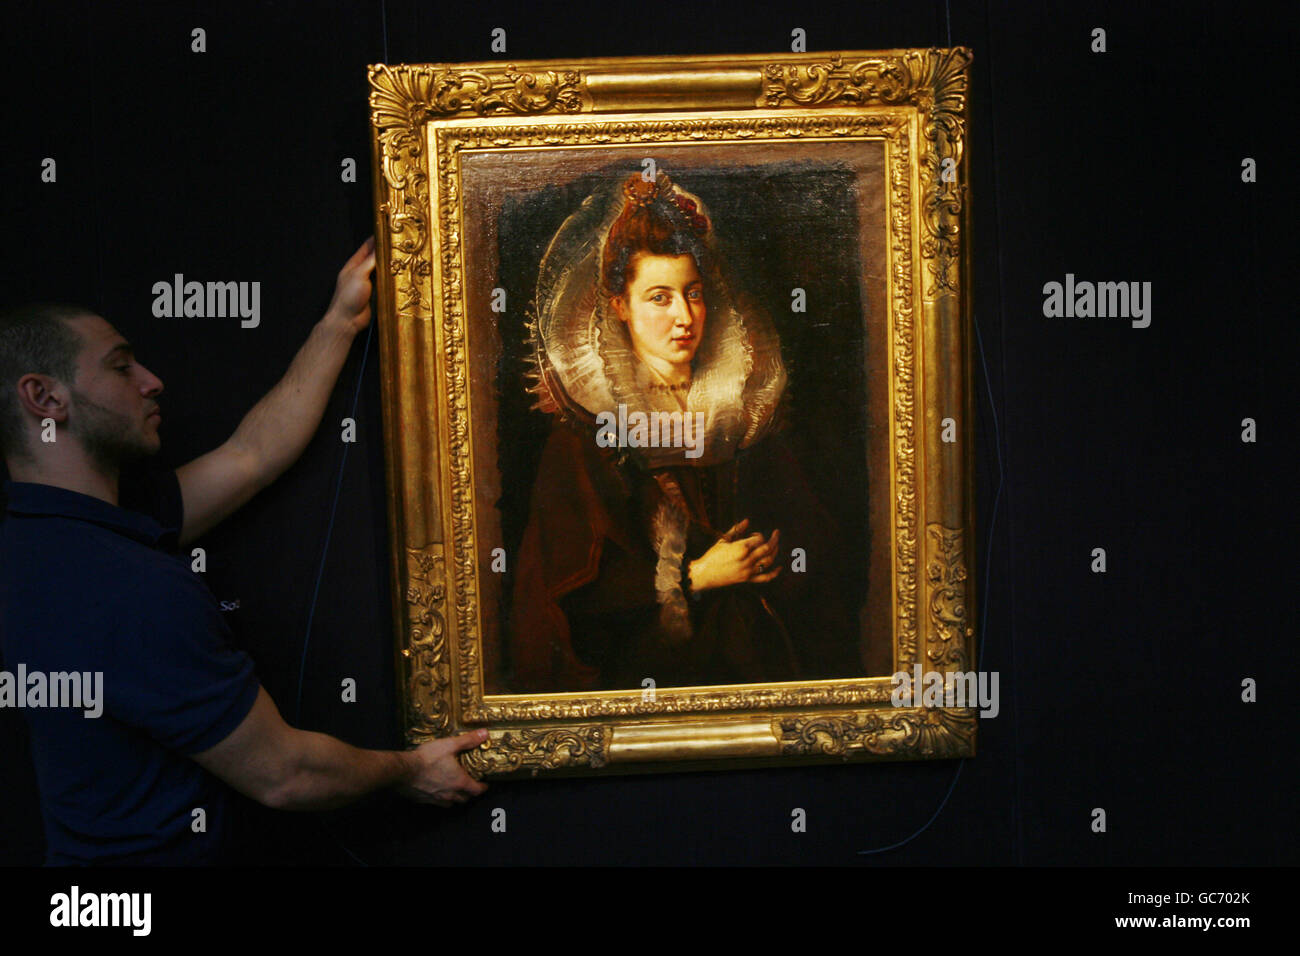 Sotheby's Old Master Paintings sale Stock Photo - Alamy